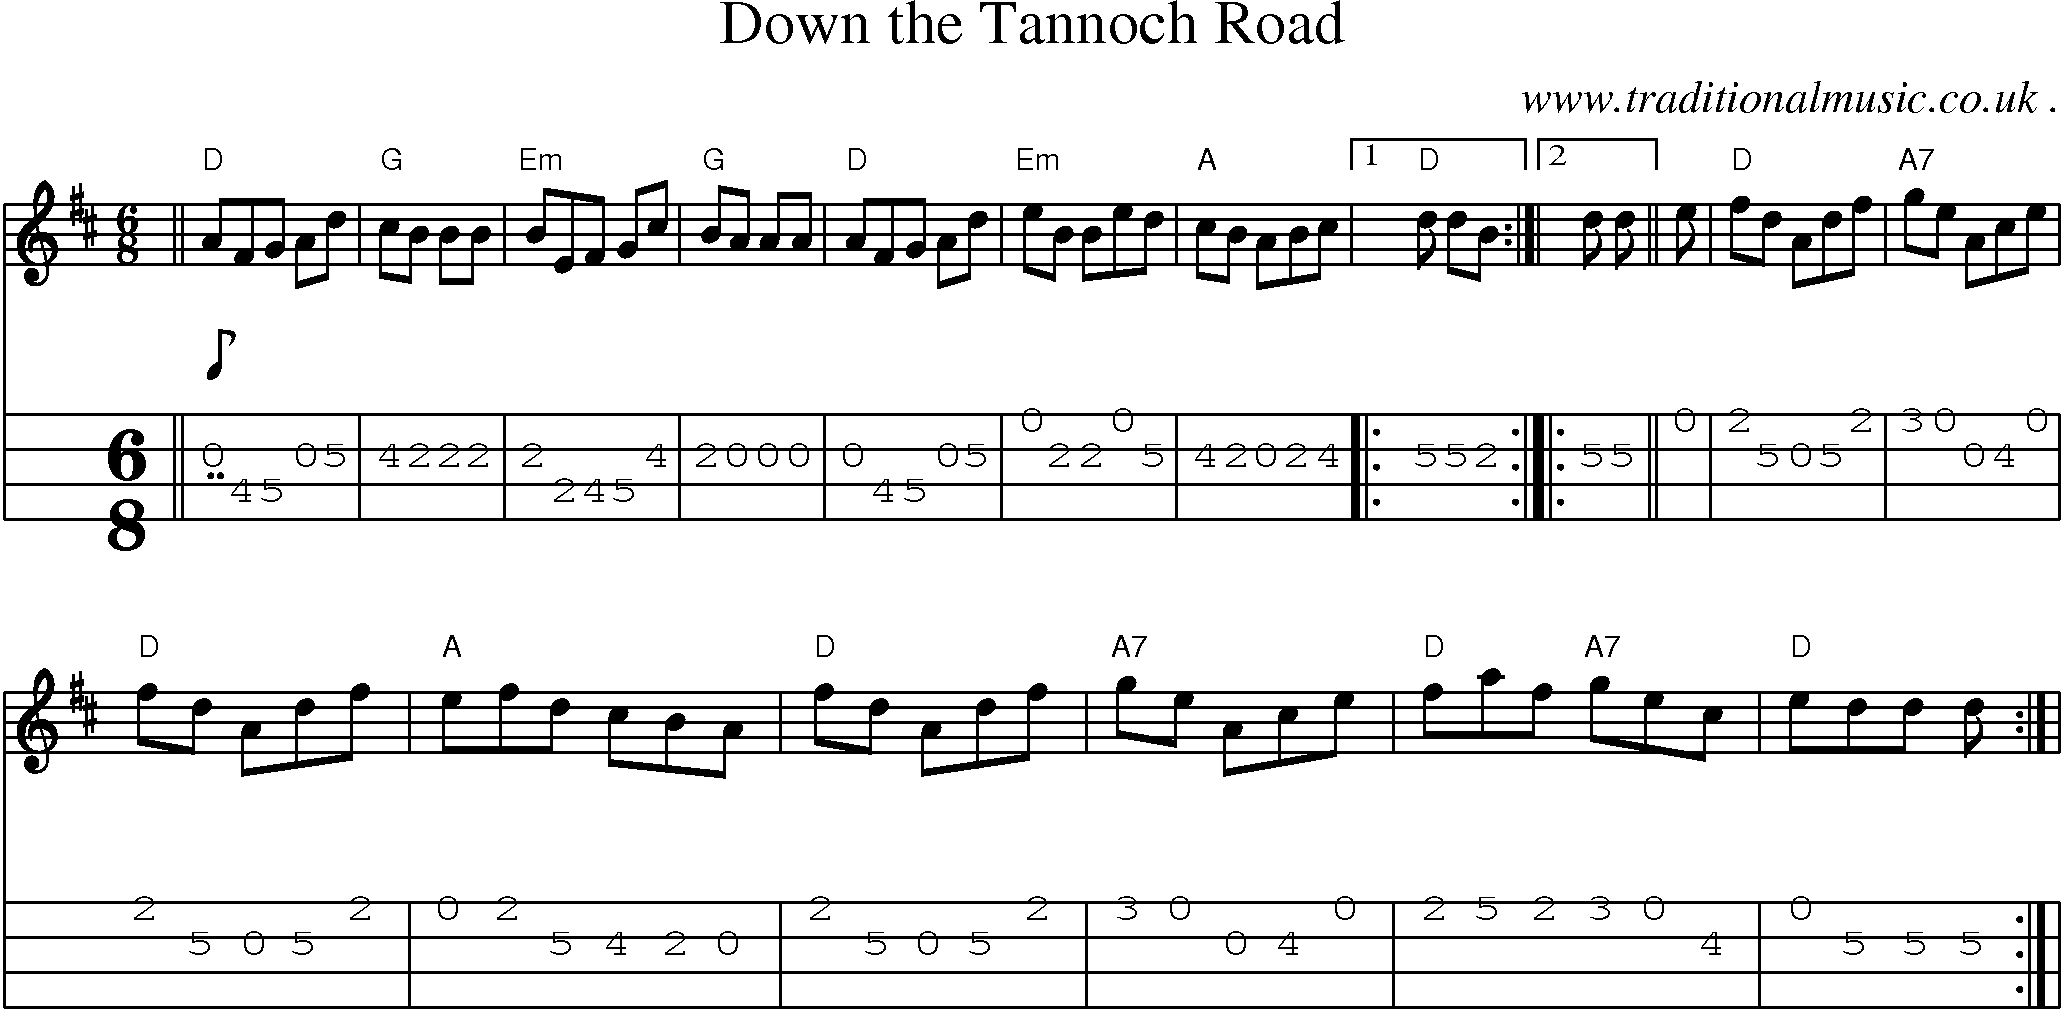 Sheet-music  score, Chords and Mandolin Tabs for Down The Tannoch Road